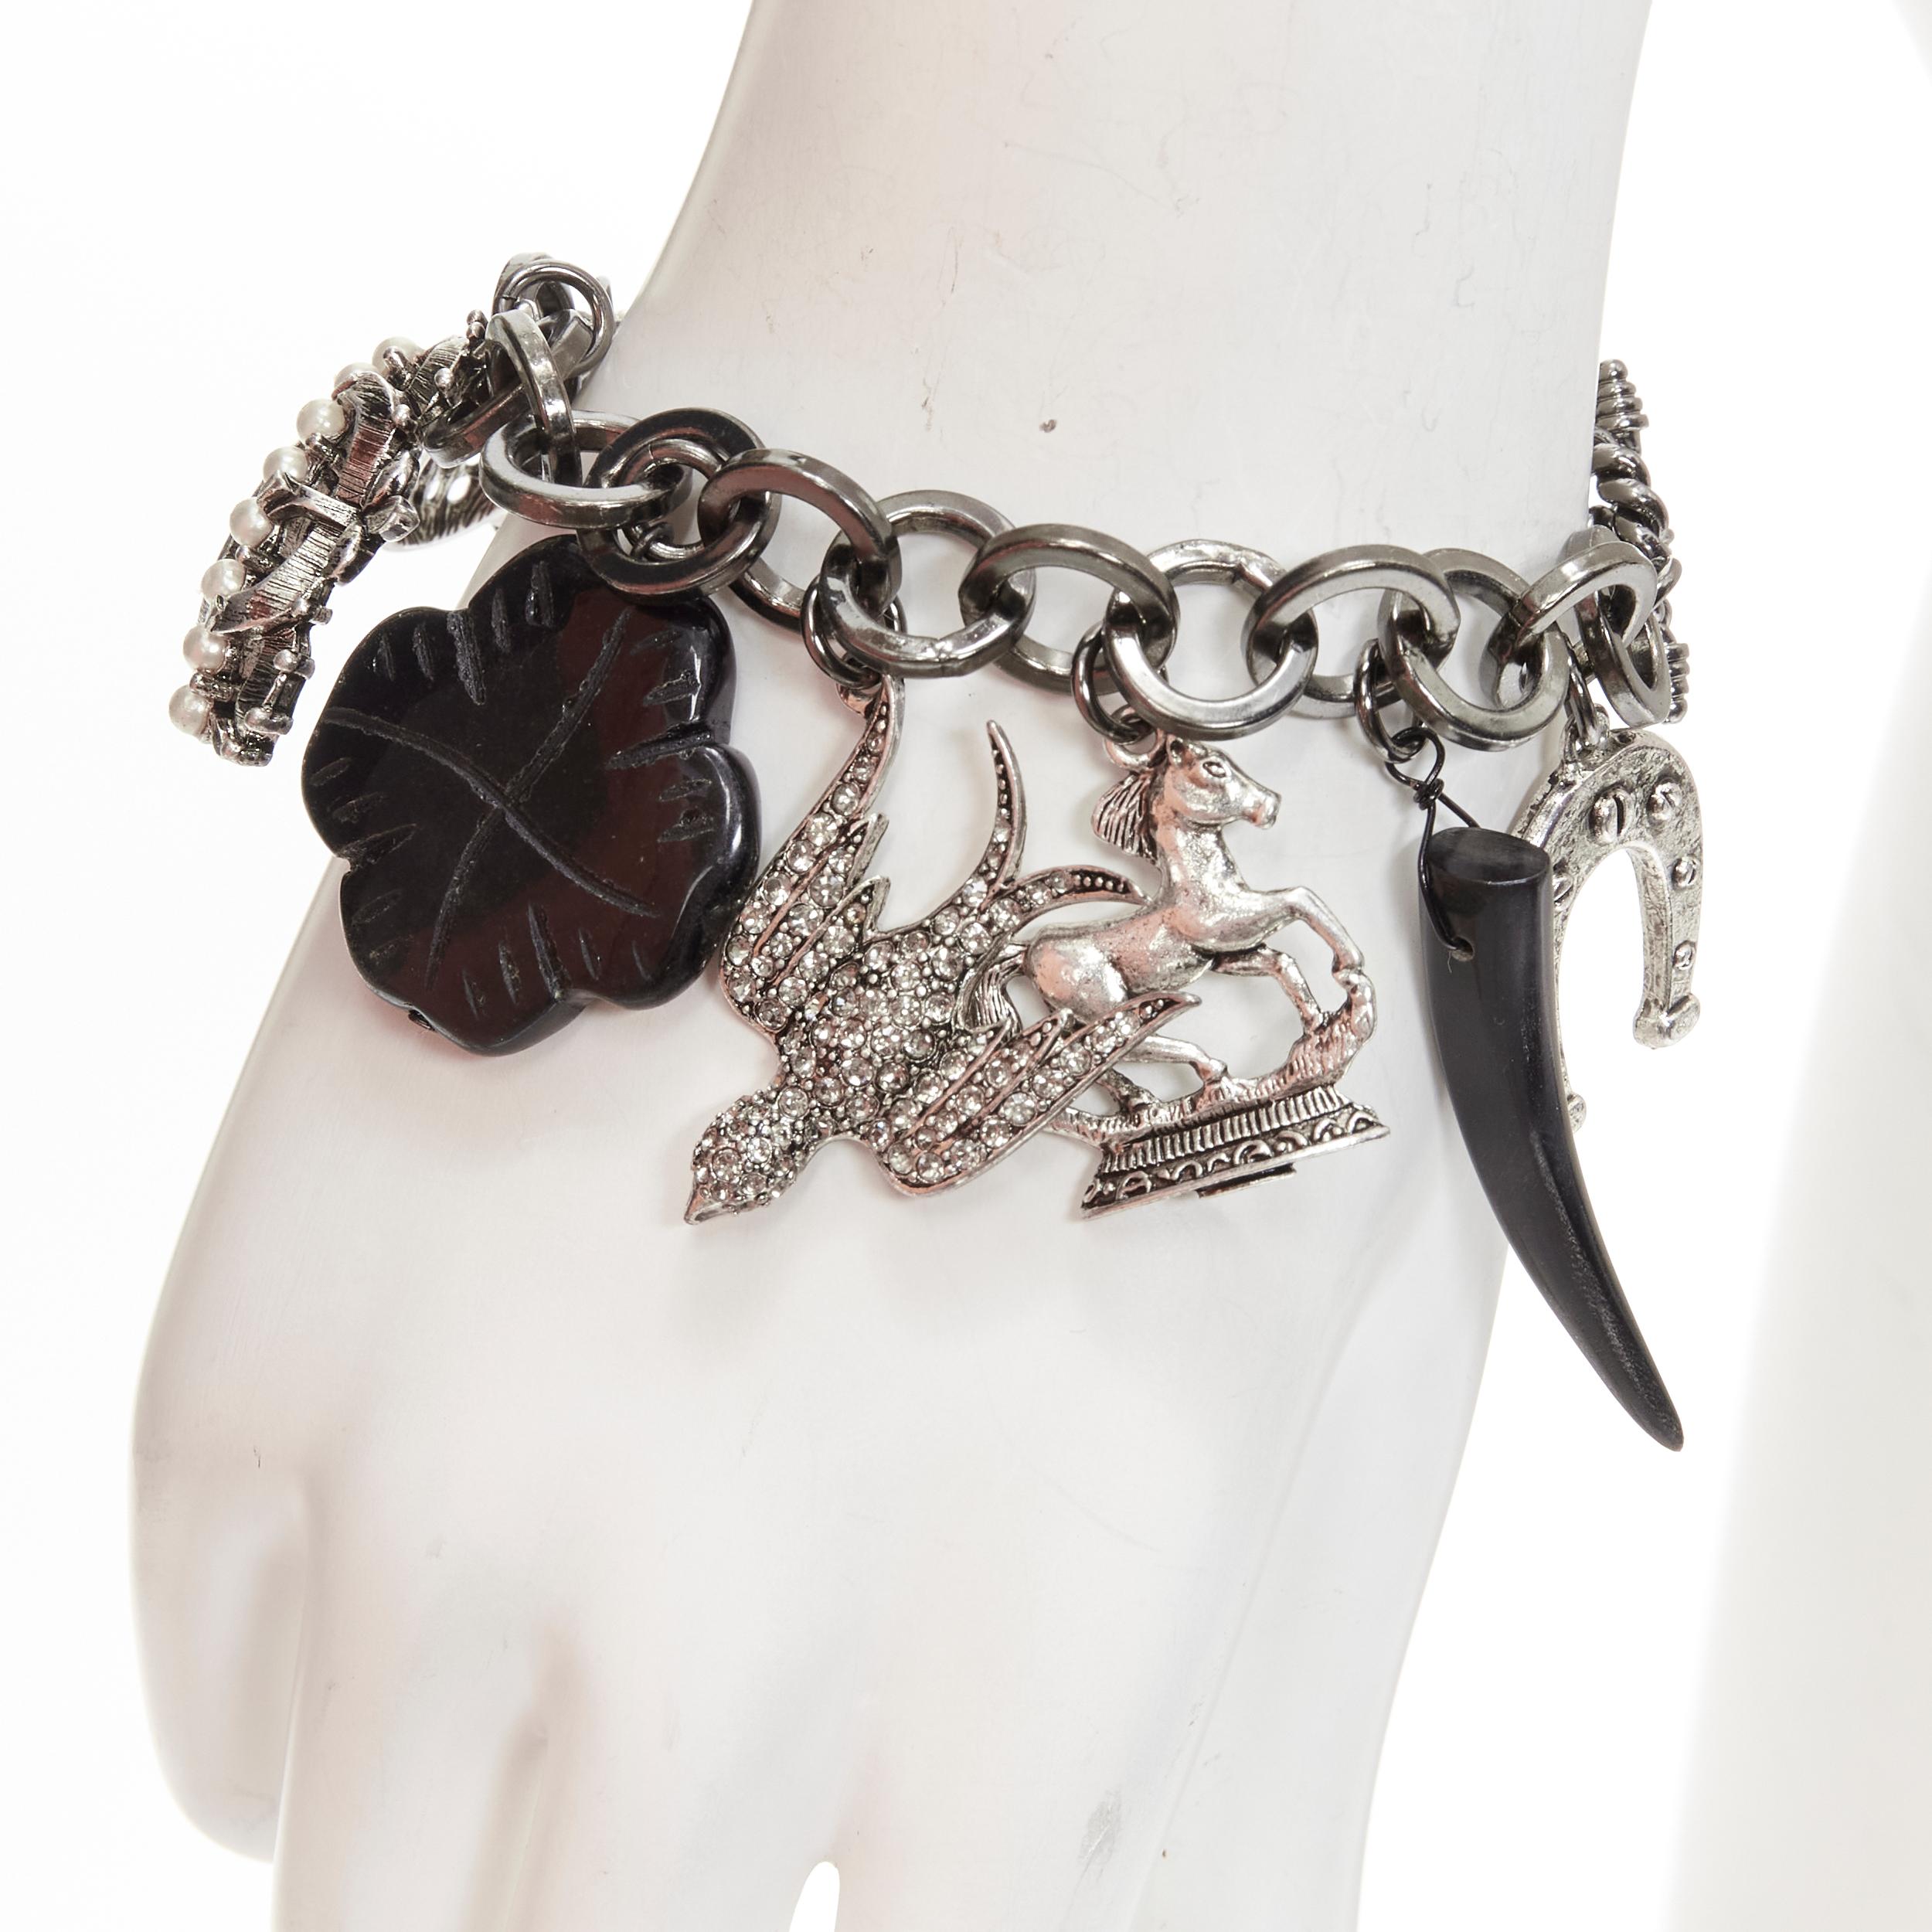 GRAZIANO black silver clover skull crown punk rock chain charm bracelet
Reference: ANWU/A00287
Brand: Graziano
Extra Details: Bee, crystal swallow, horse and ivory shape charms.

CONDITION:
Condition: Very good, this item was pre-owned and is in